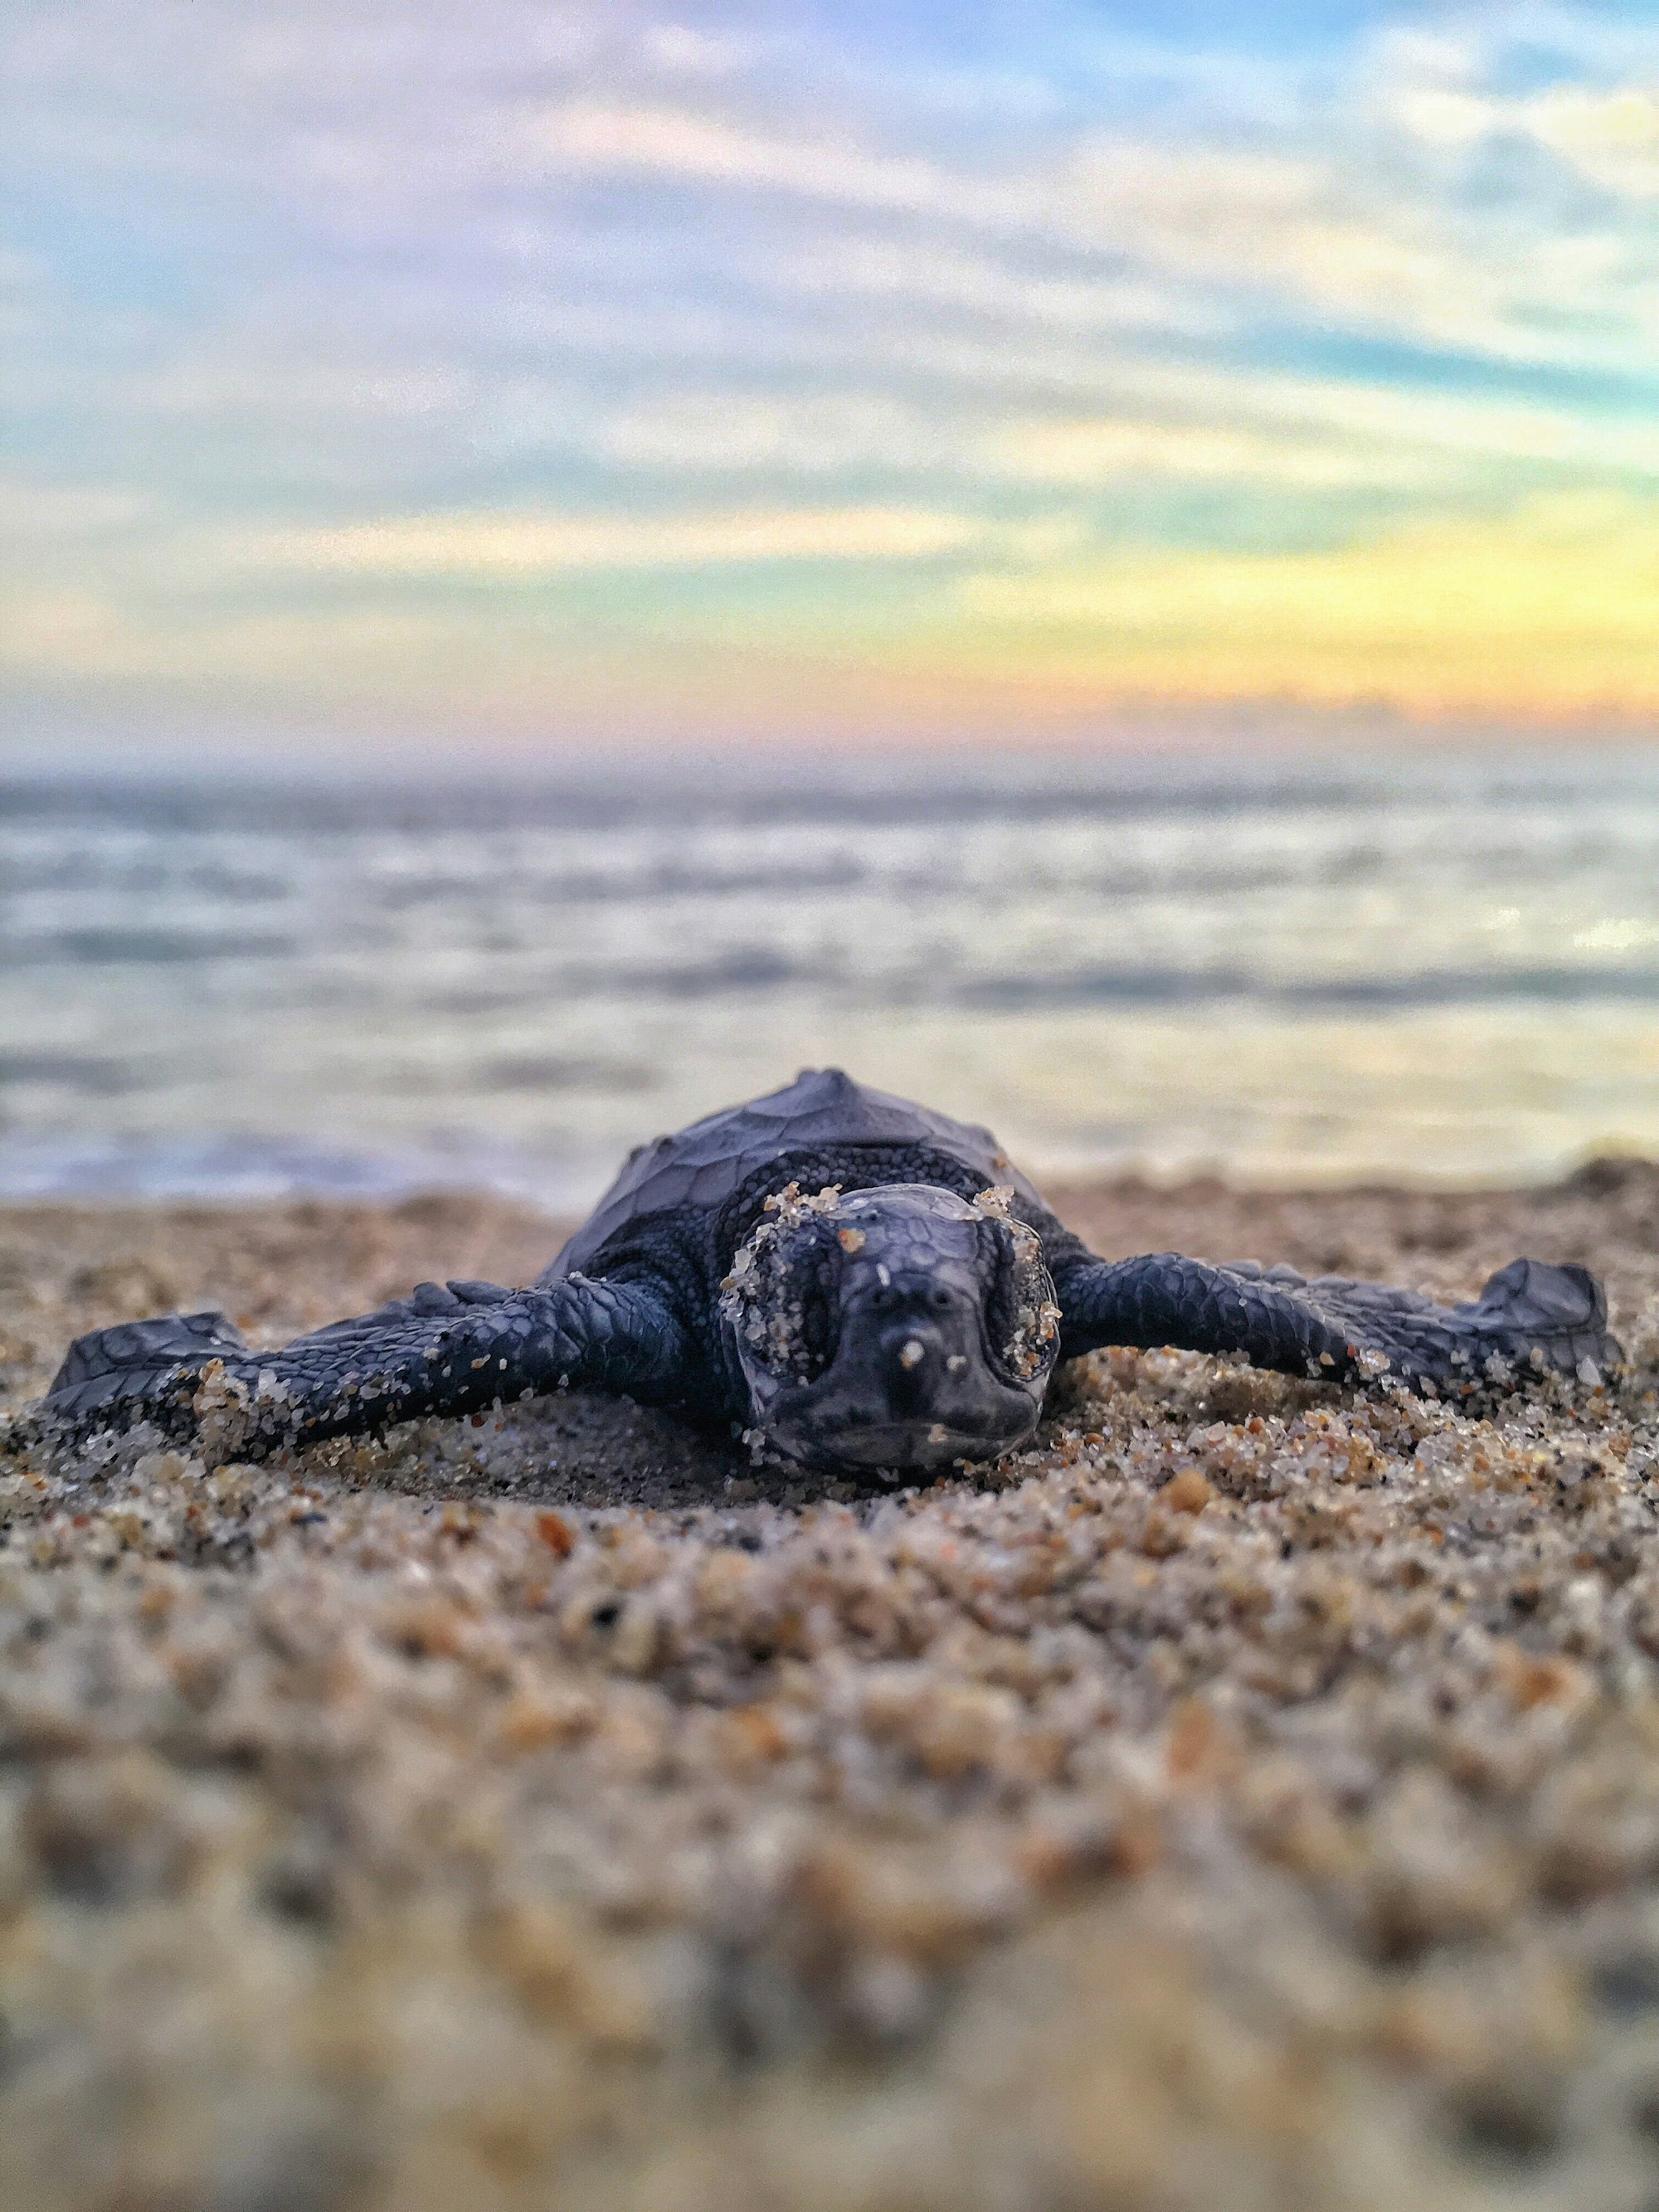 Once upon a time, we had the pleasure of witnessing the setting free of a legion of baby sea turtles. This cutie wasn’t too much in a hurry and took some time out to strike a pose for me.